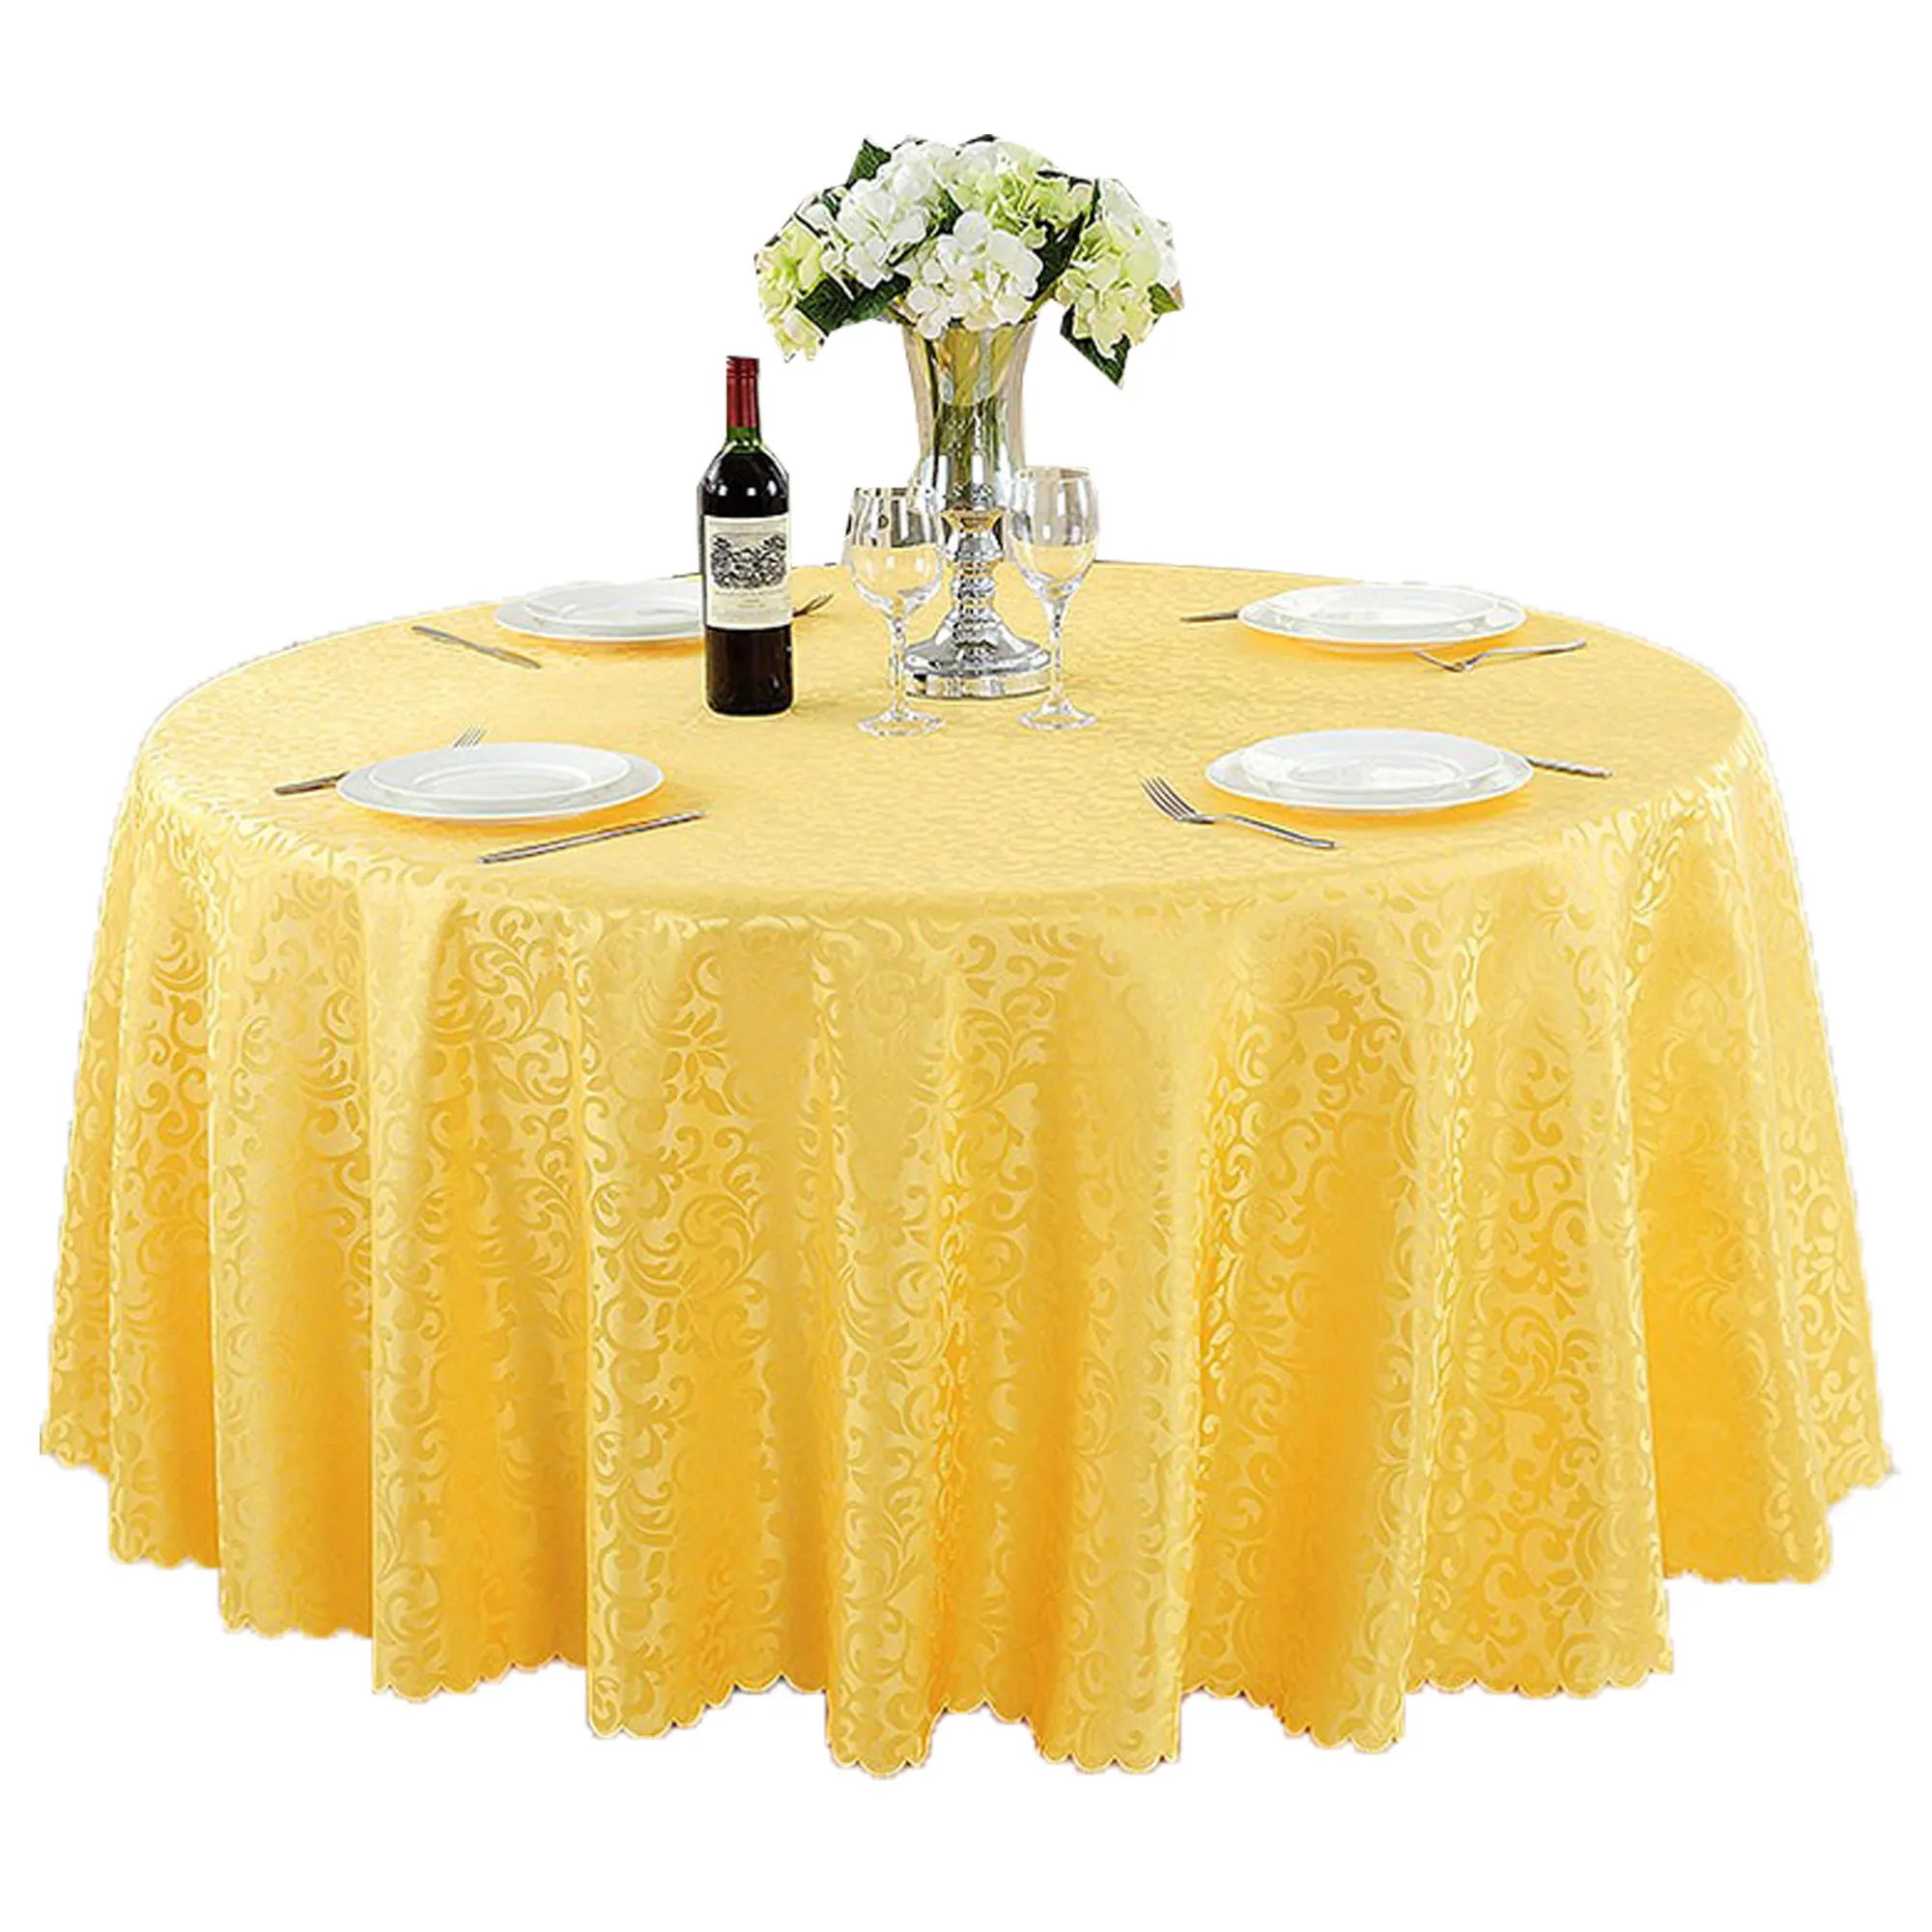 Cheap polyester banquet round wedding hotel table cloth table cover